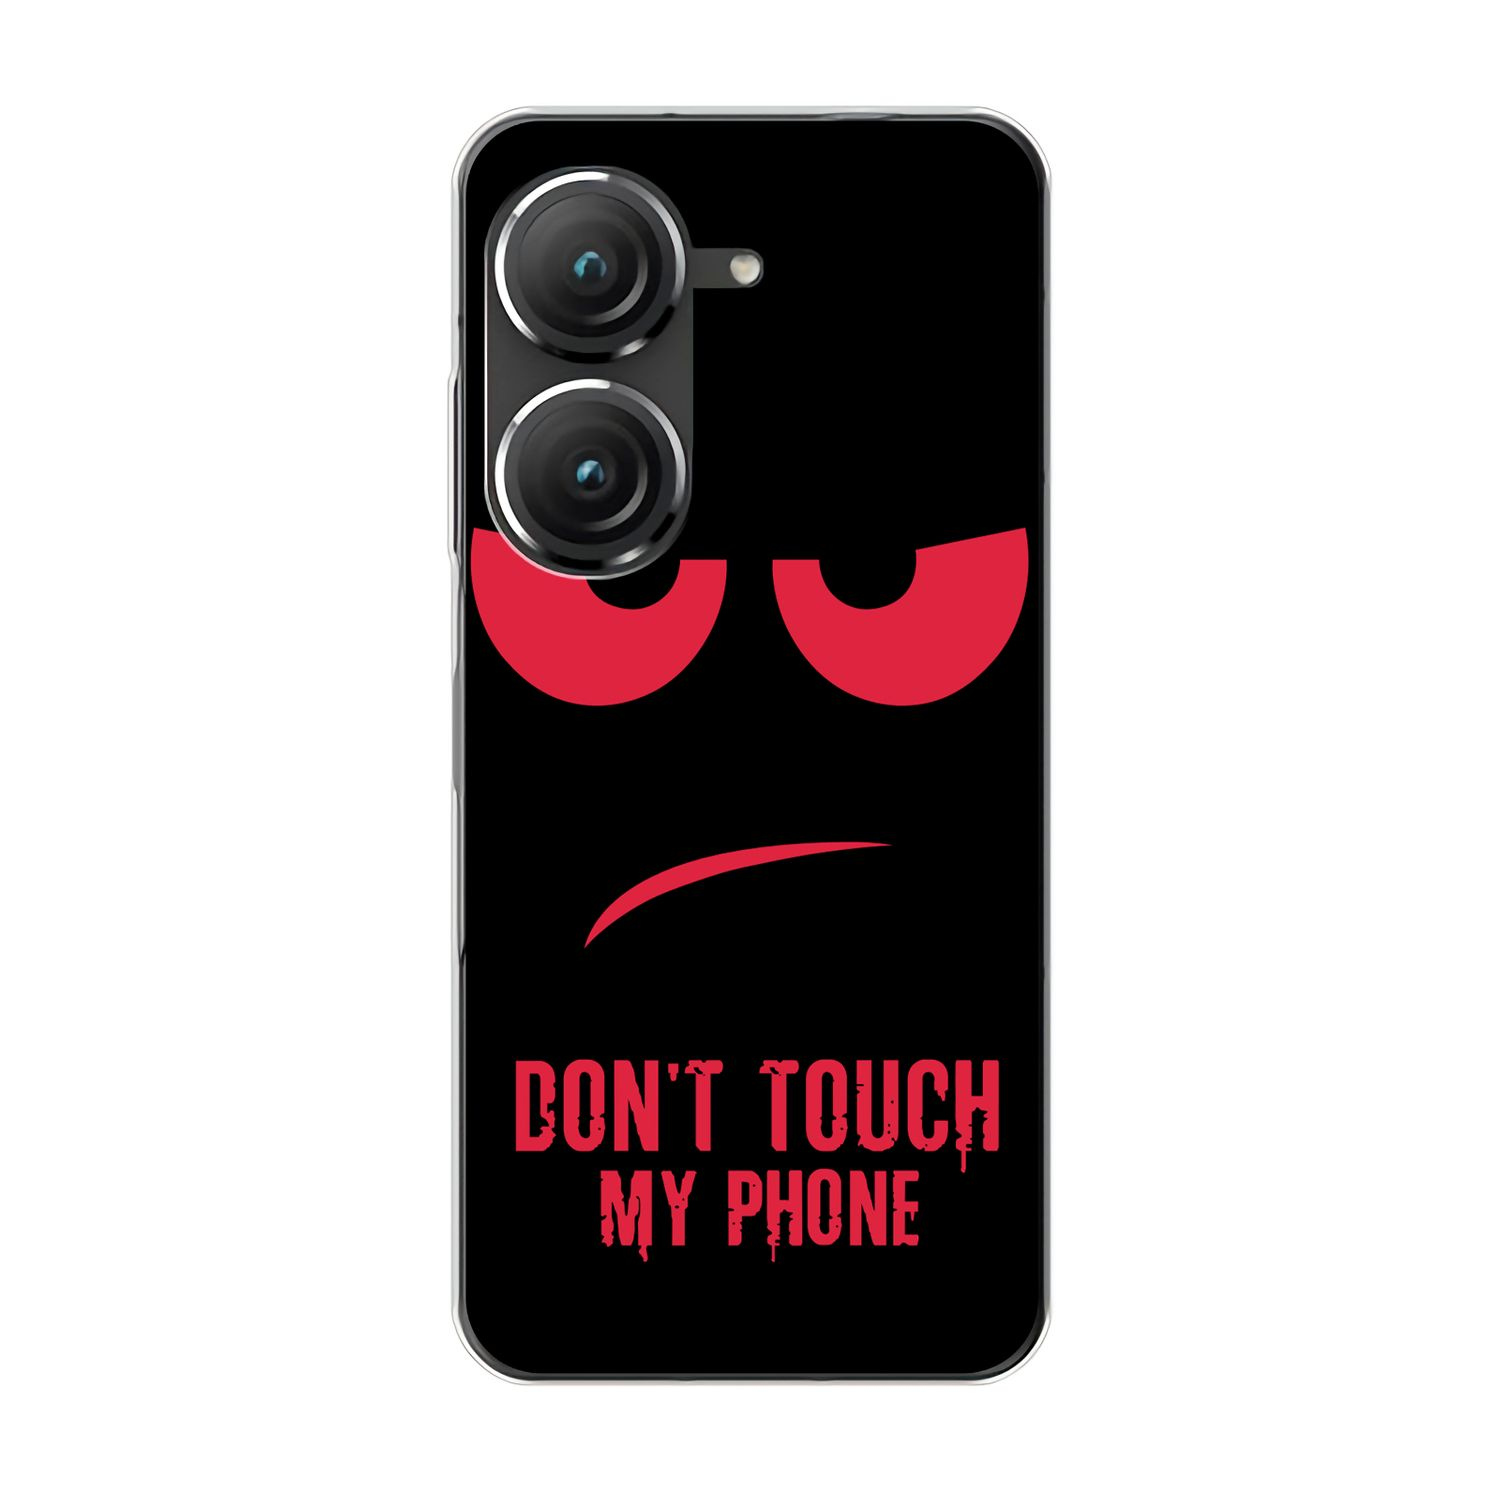 KÖNIG DESIGN Case, Rot Asus, Touch Backcover, Phone 9, Zenfone My Dont